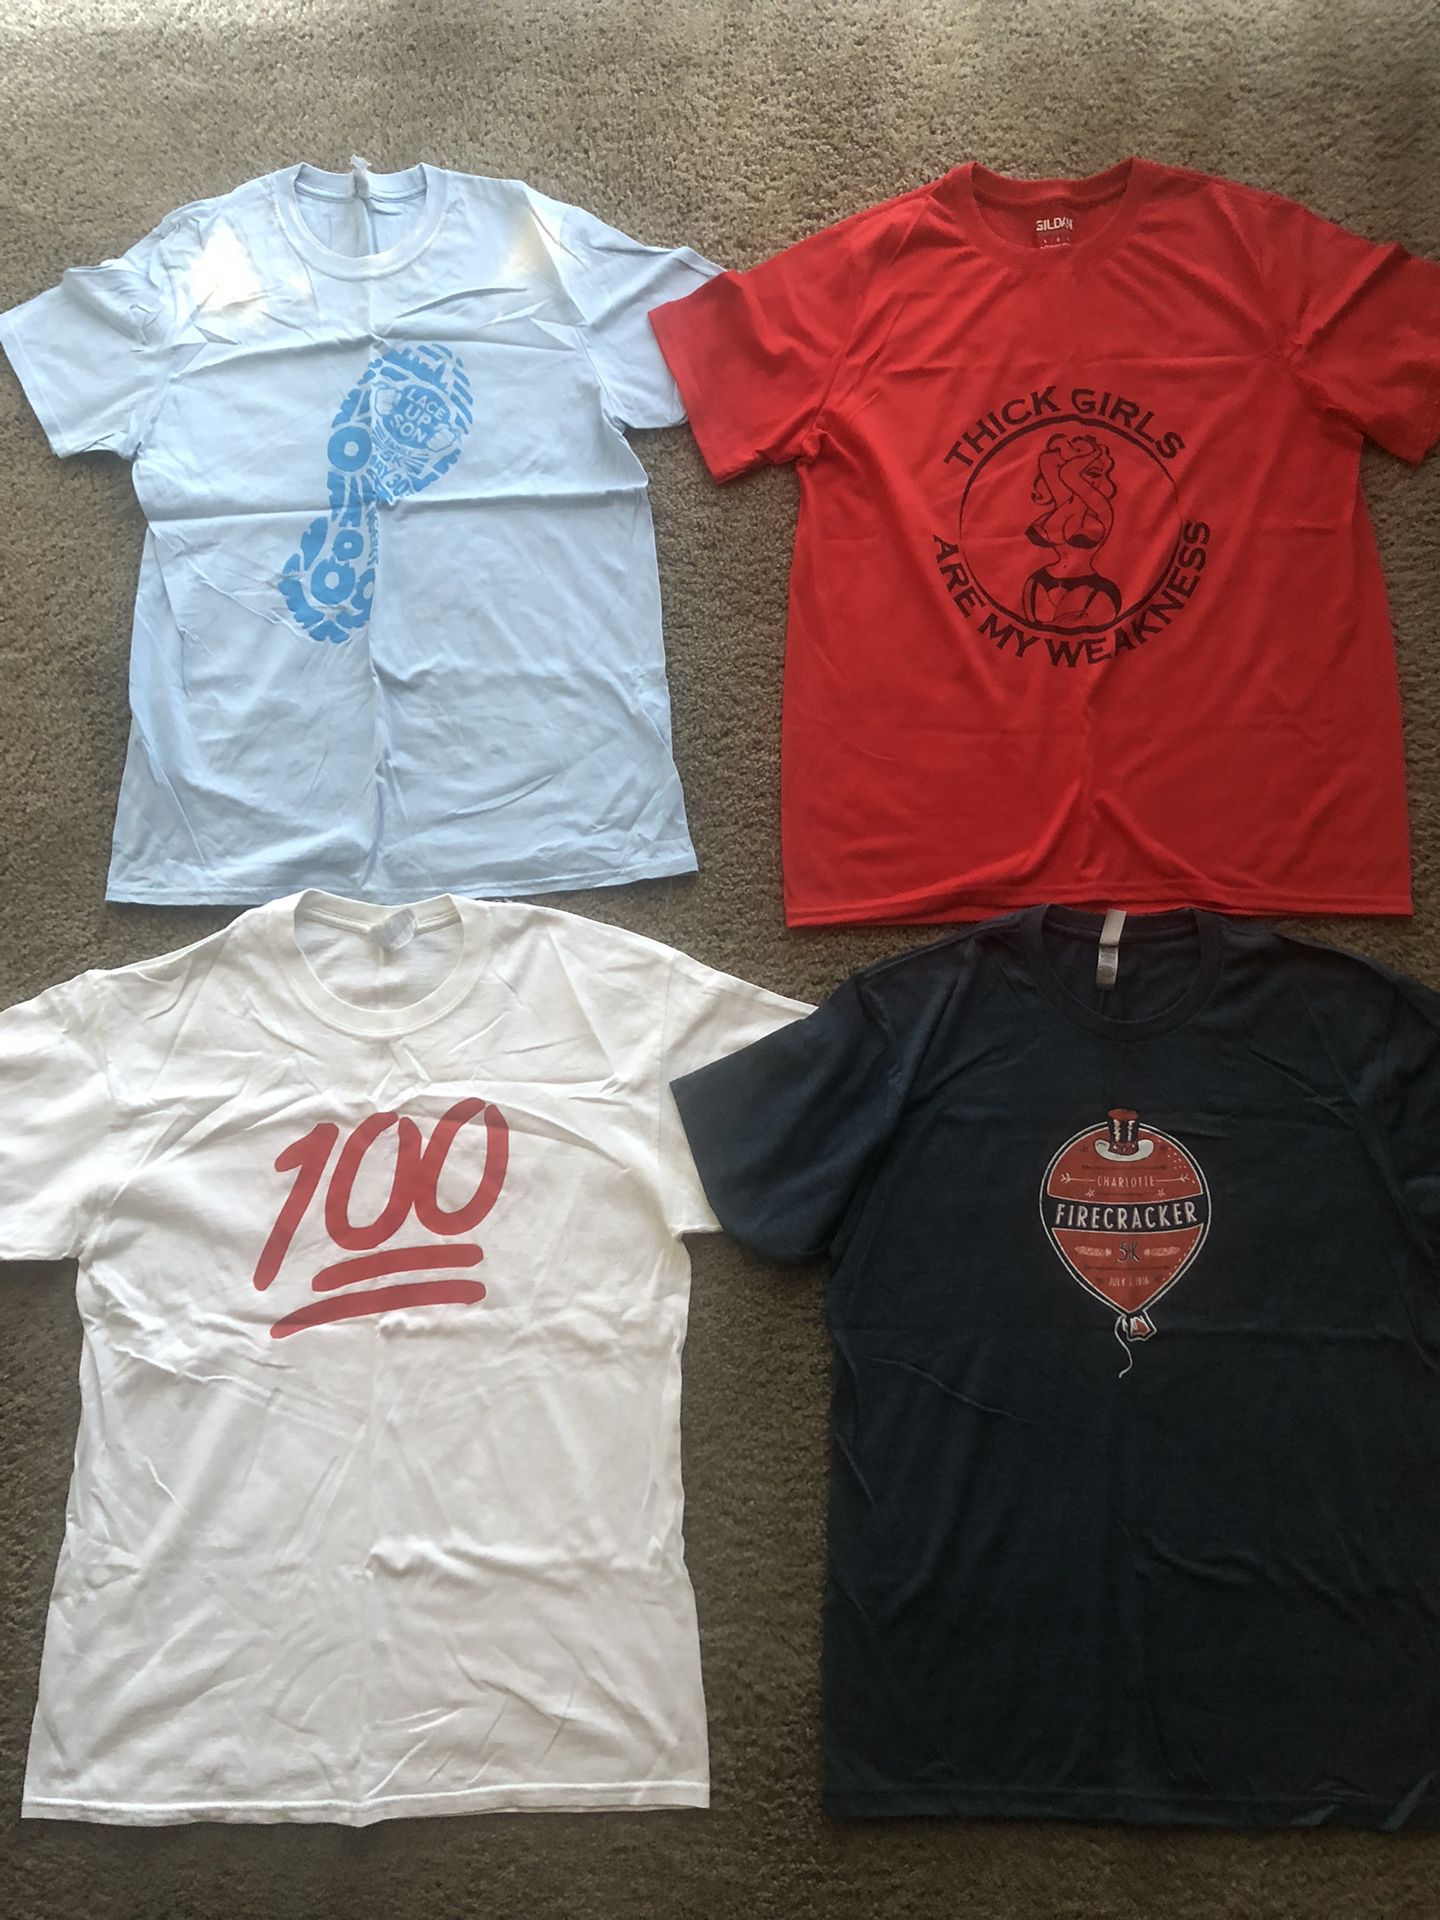 T Shirts Size Large $15 Each Or Best Offer